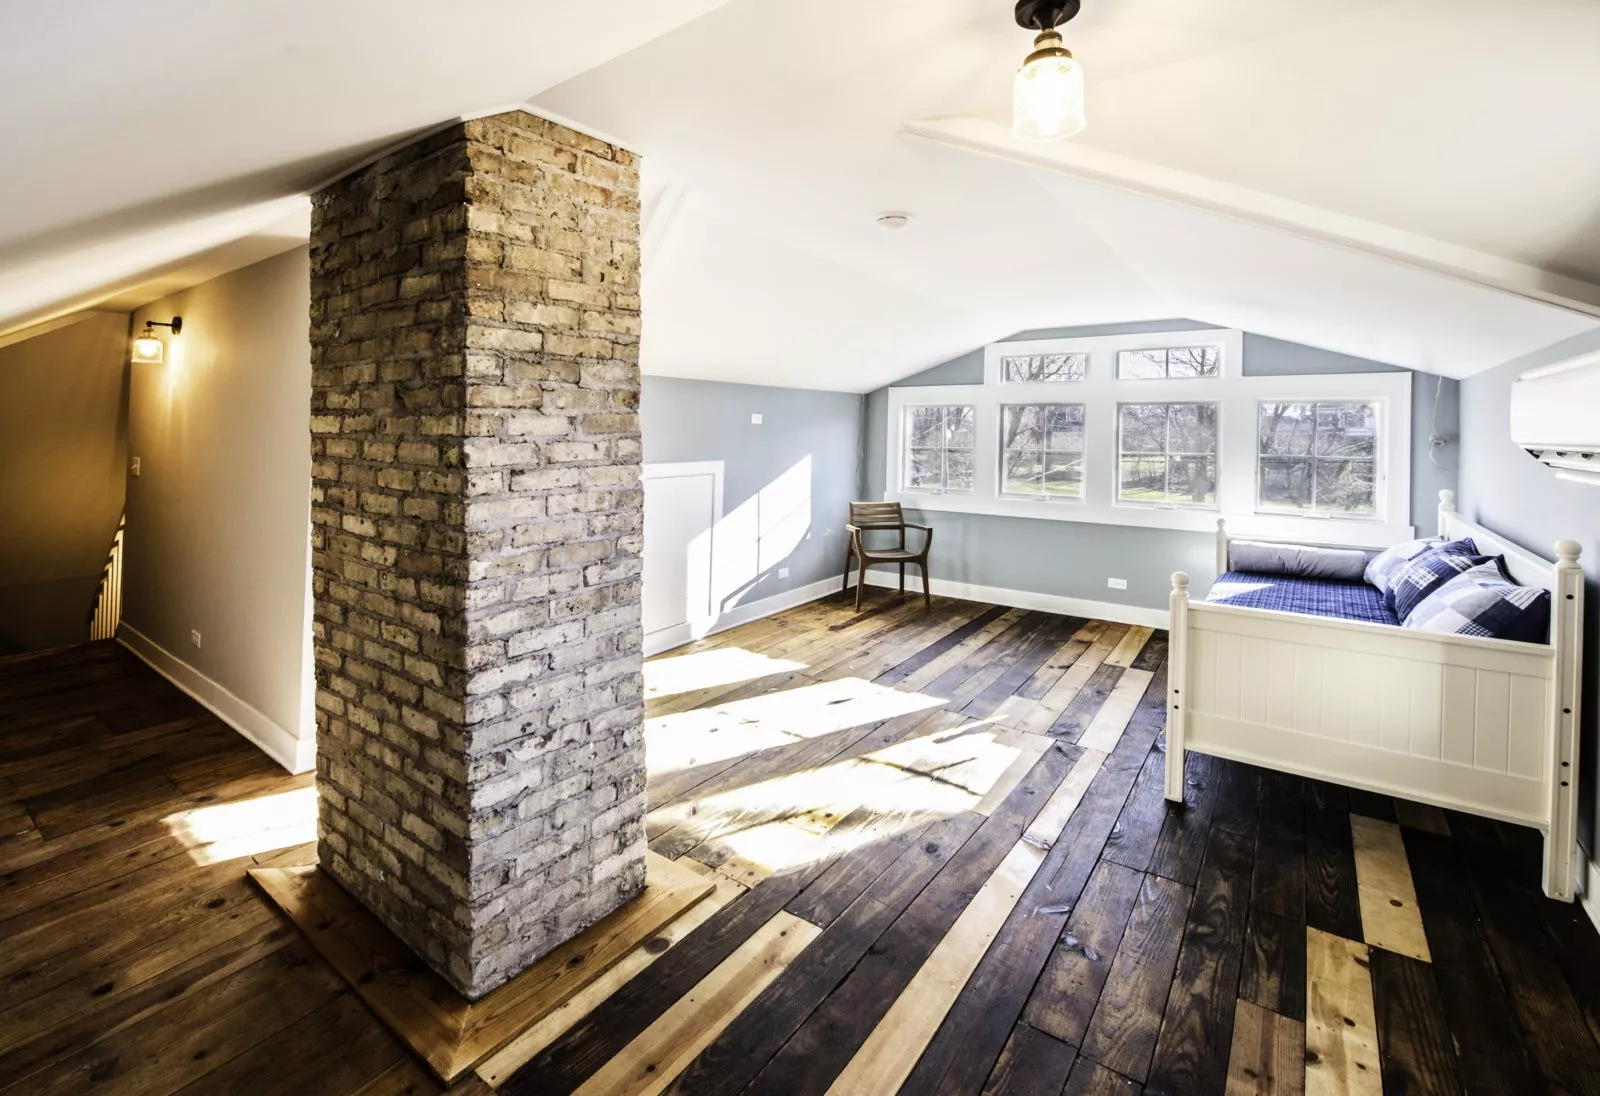 Attic renovation with light blue walls hardwood floors and a brick chimnney as the centerpiece